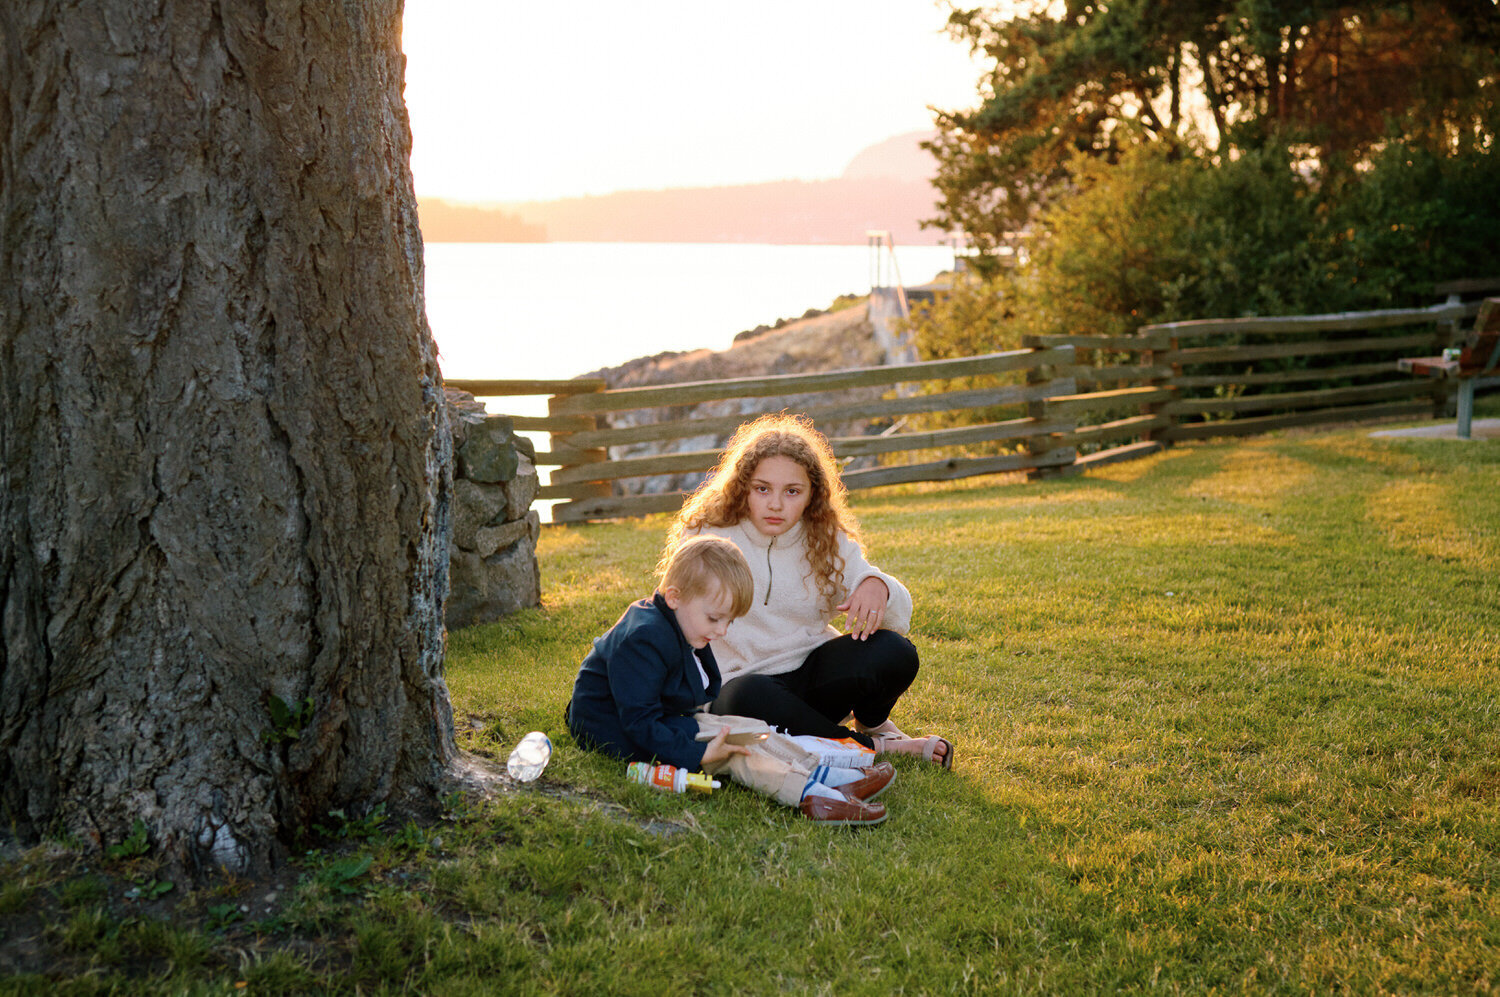 Young wedding guests sit in the sunset light away from the wedding reception